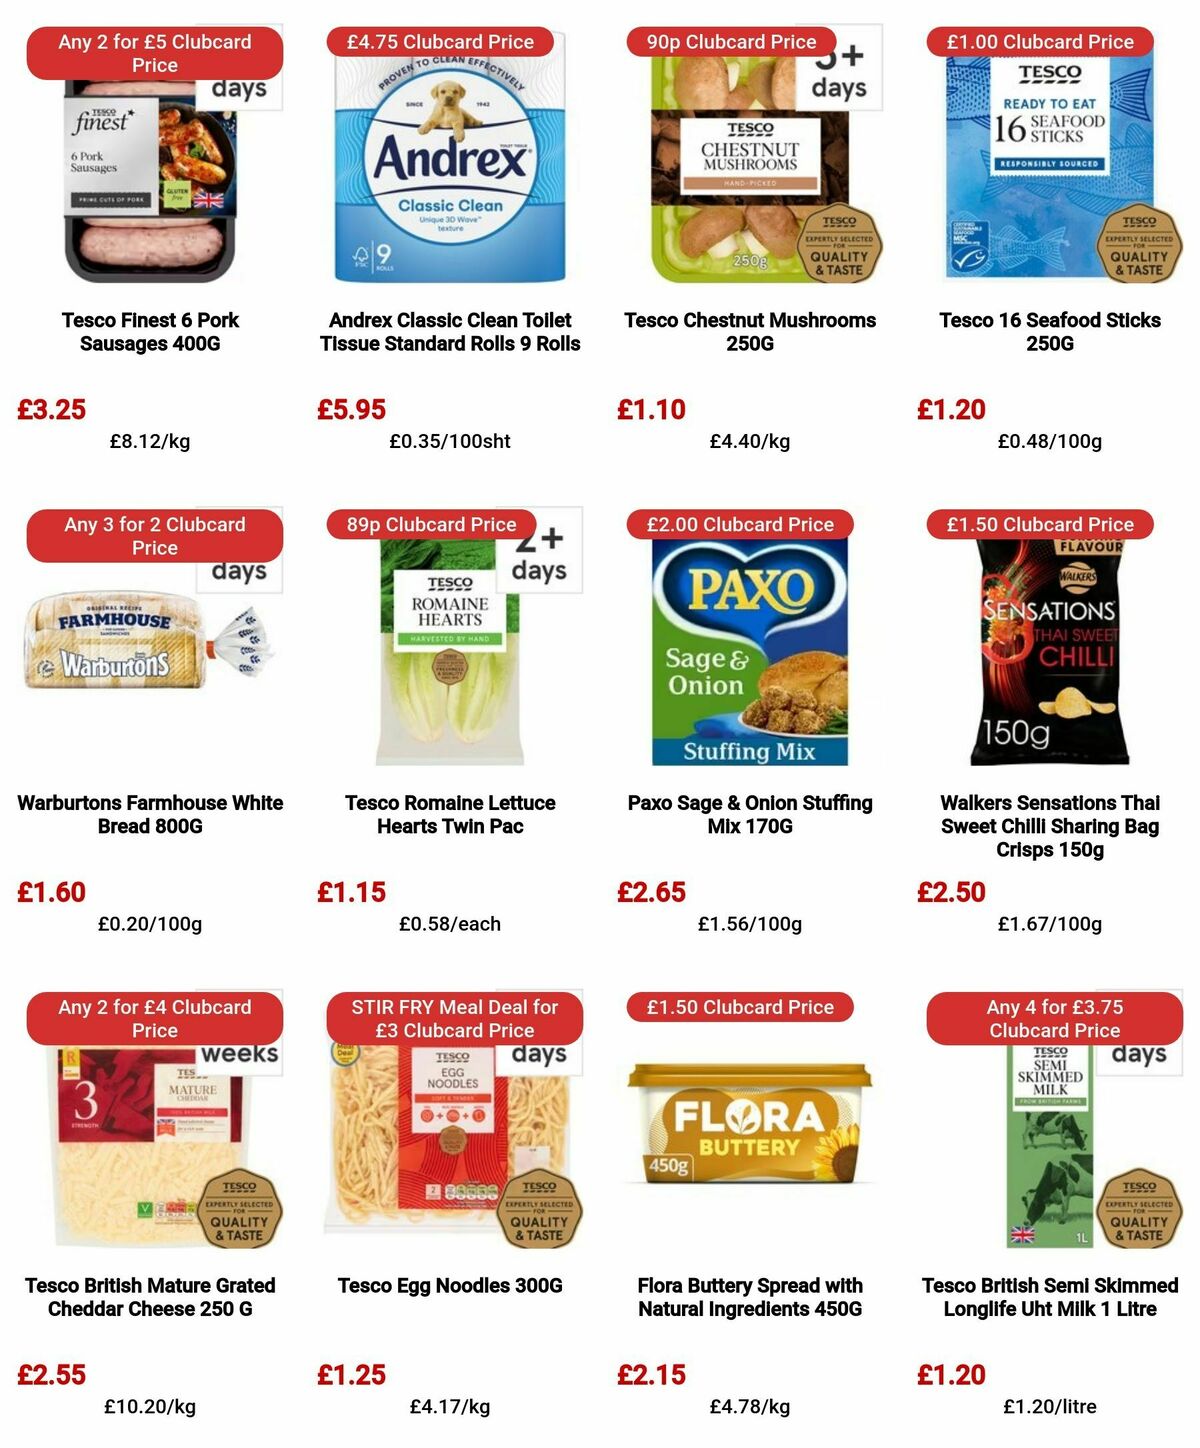 TESCO Offers from 22 February